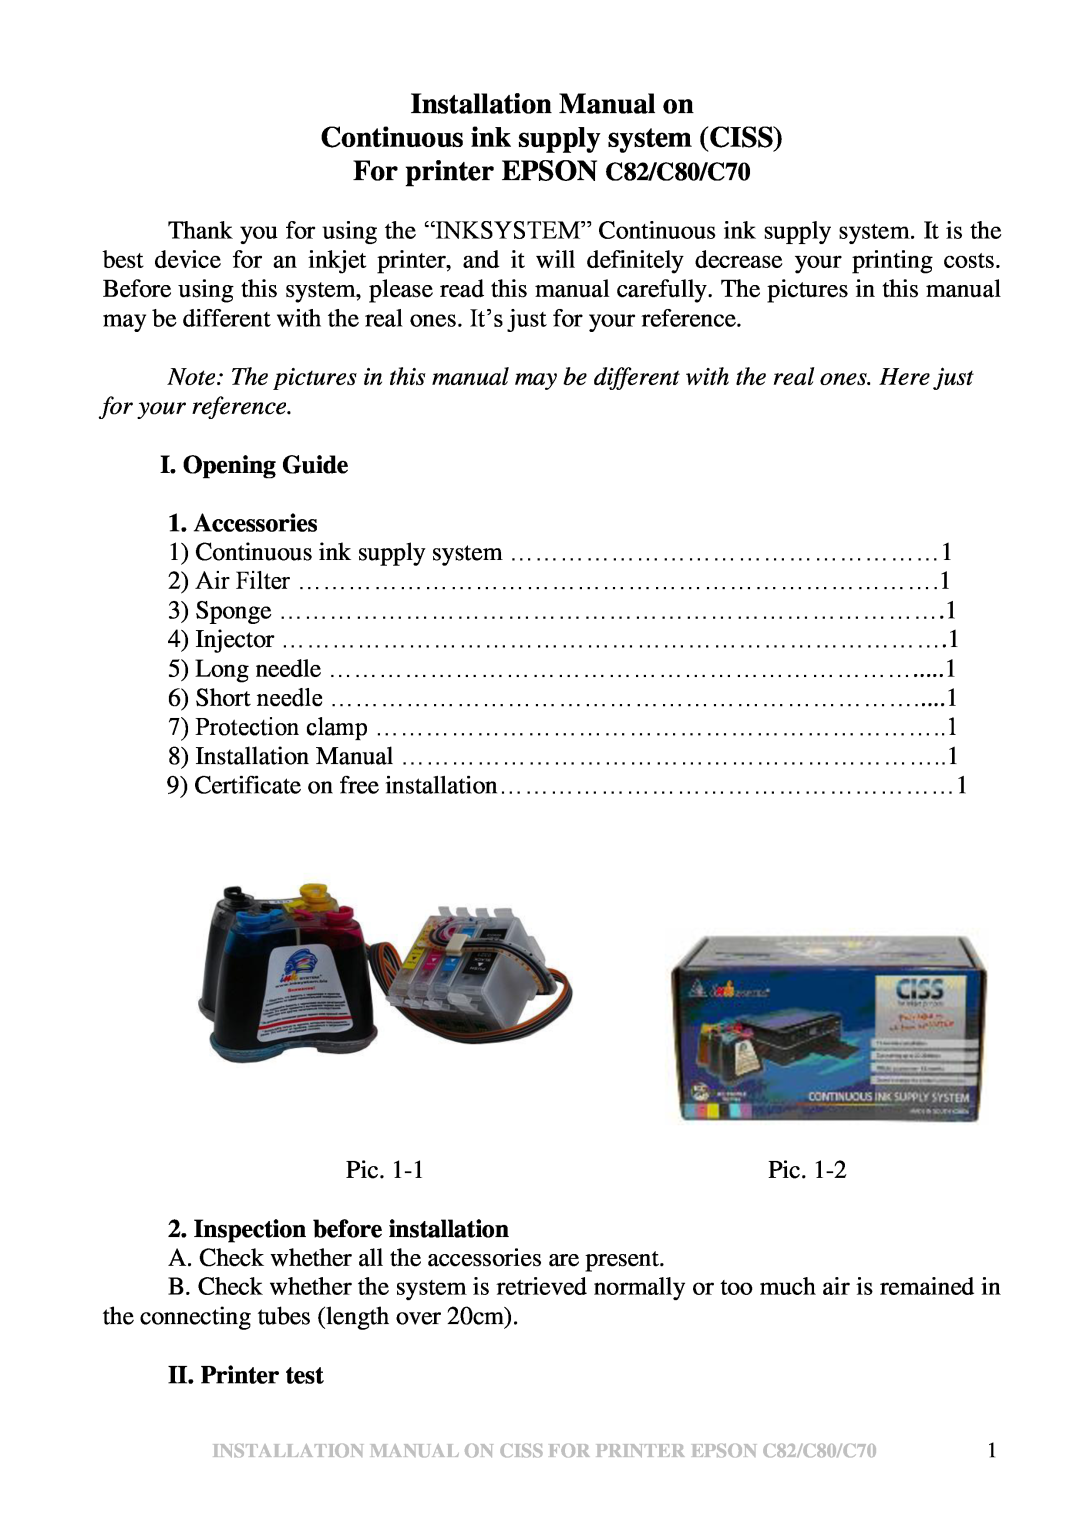 Epson C70, C82 installation manual I. Opening Guide 1. Accessories, Inspection before installation, II. Printer test 